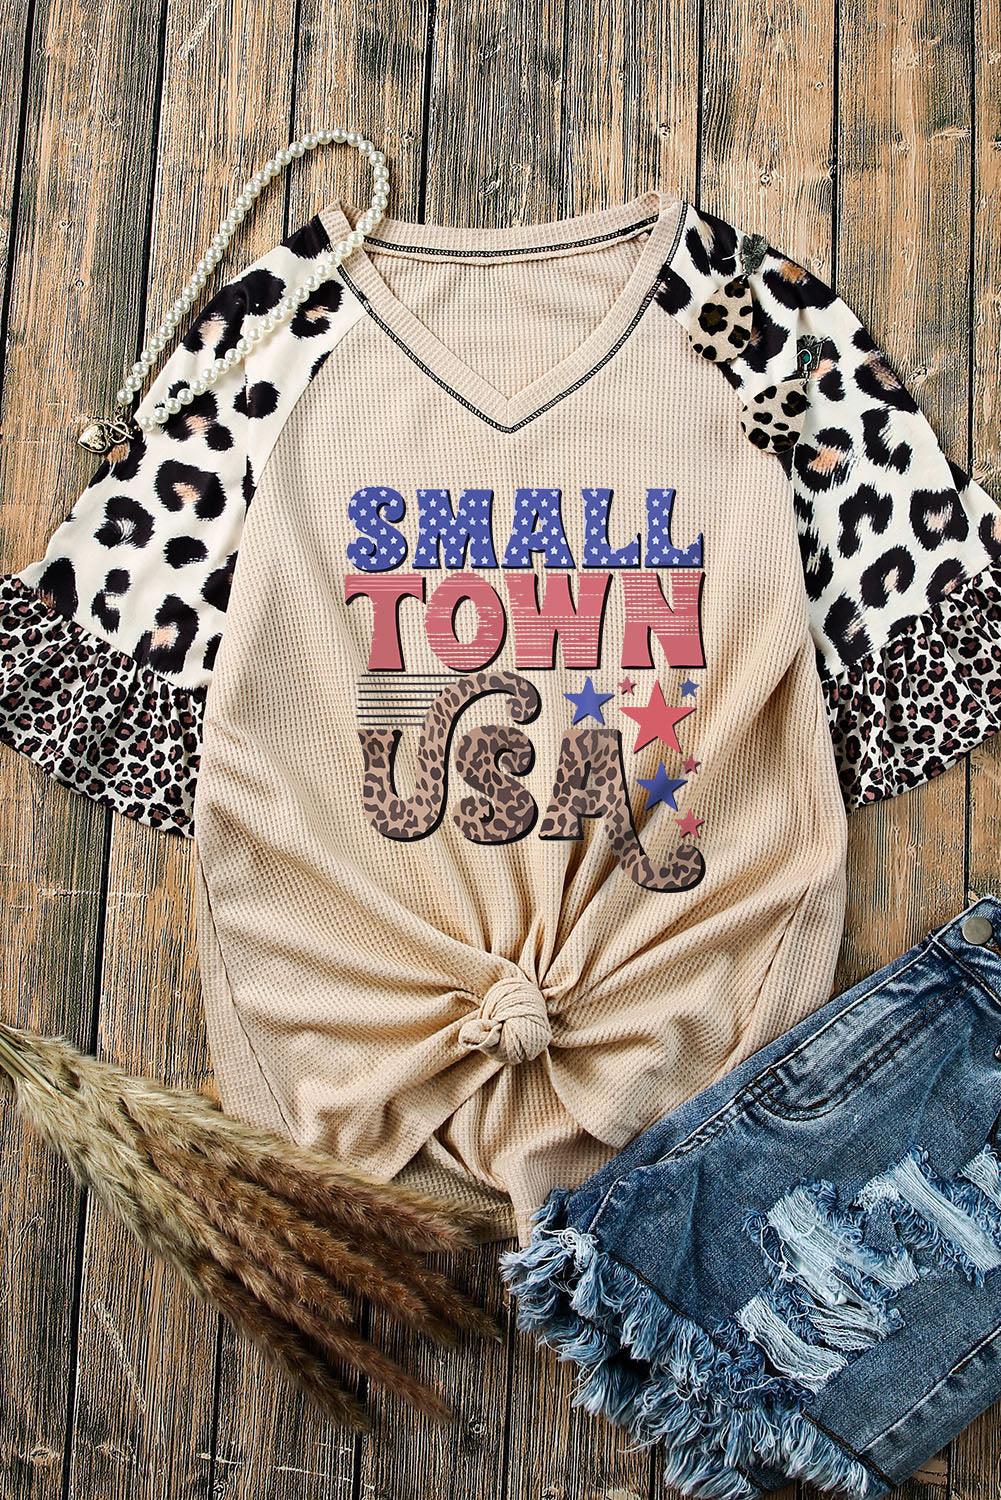 SMALL TOWN USA Graphic Leopard V-Neck Top